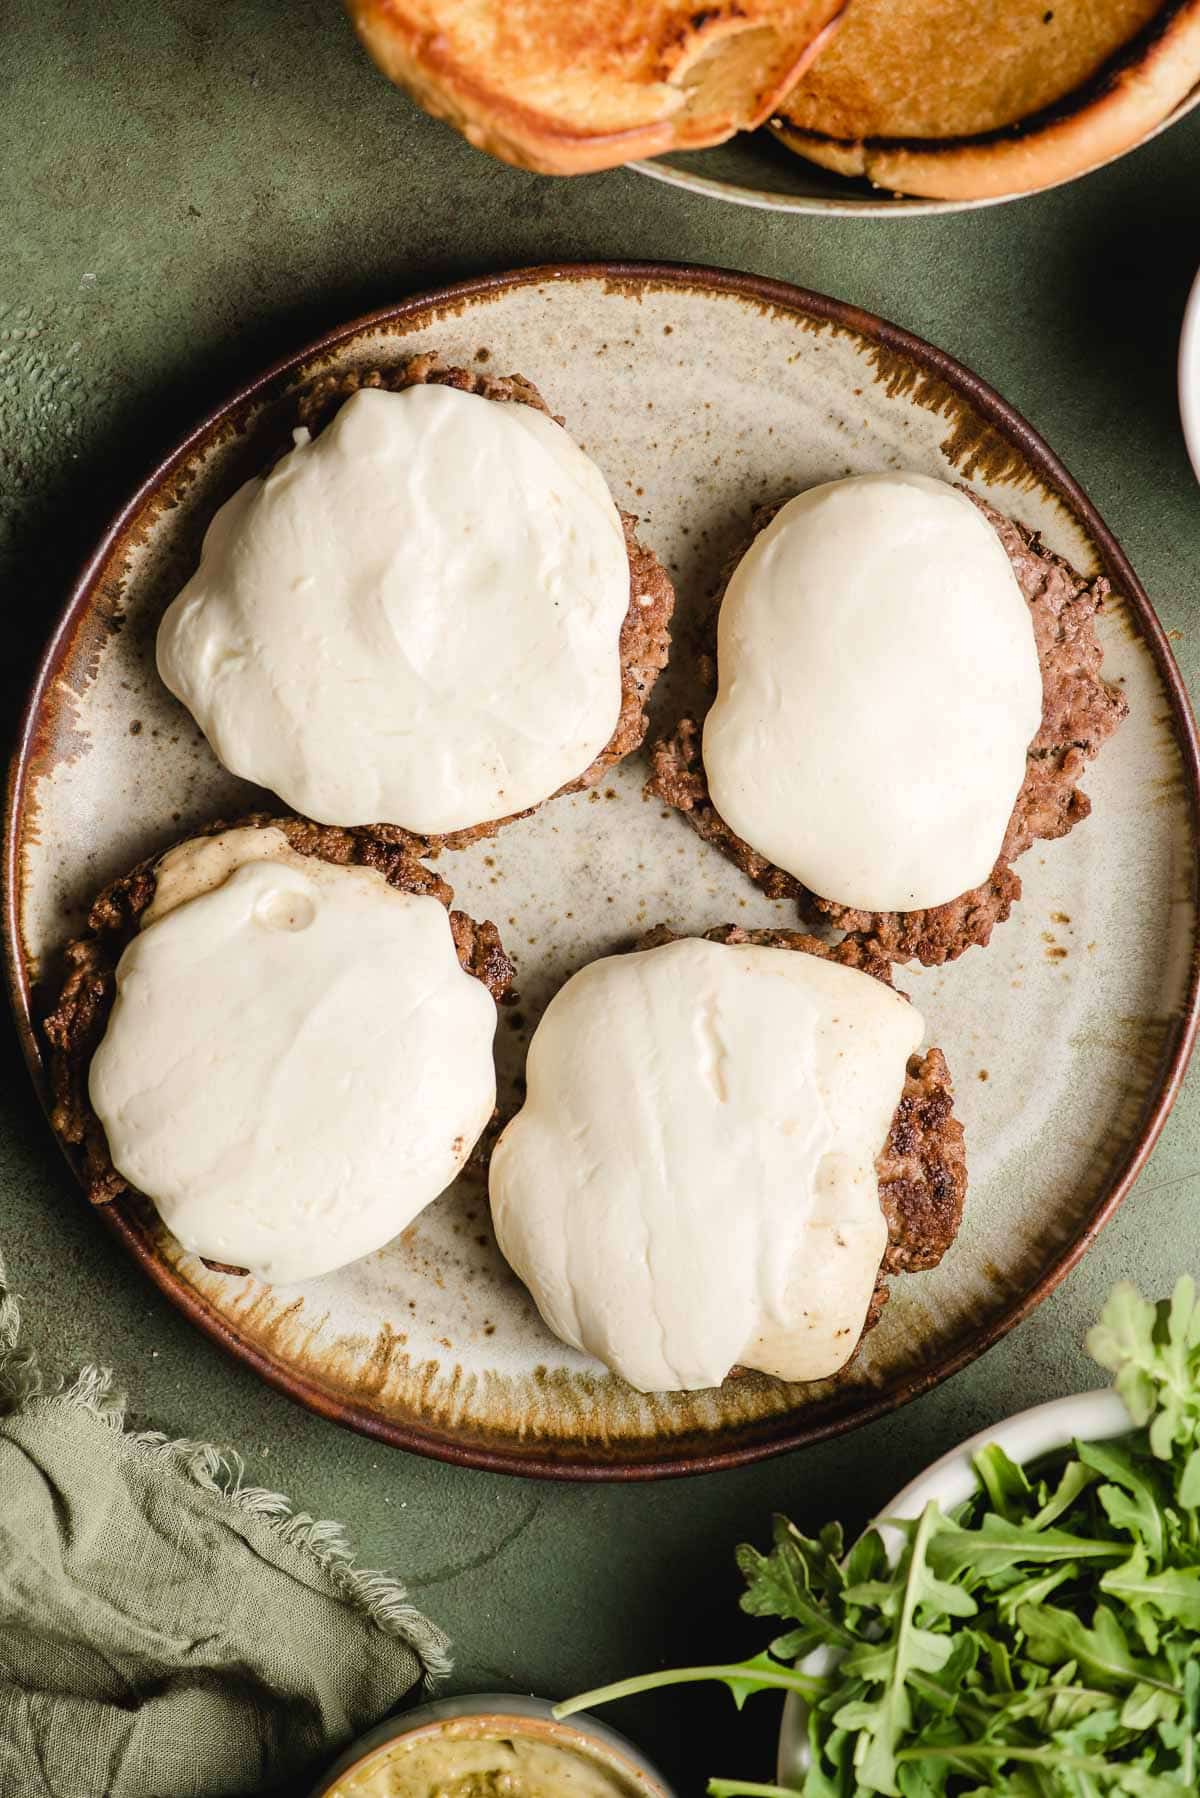 Four ground beef burger patties topped with melted mozzarella sit on a plate.